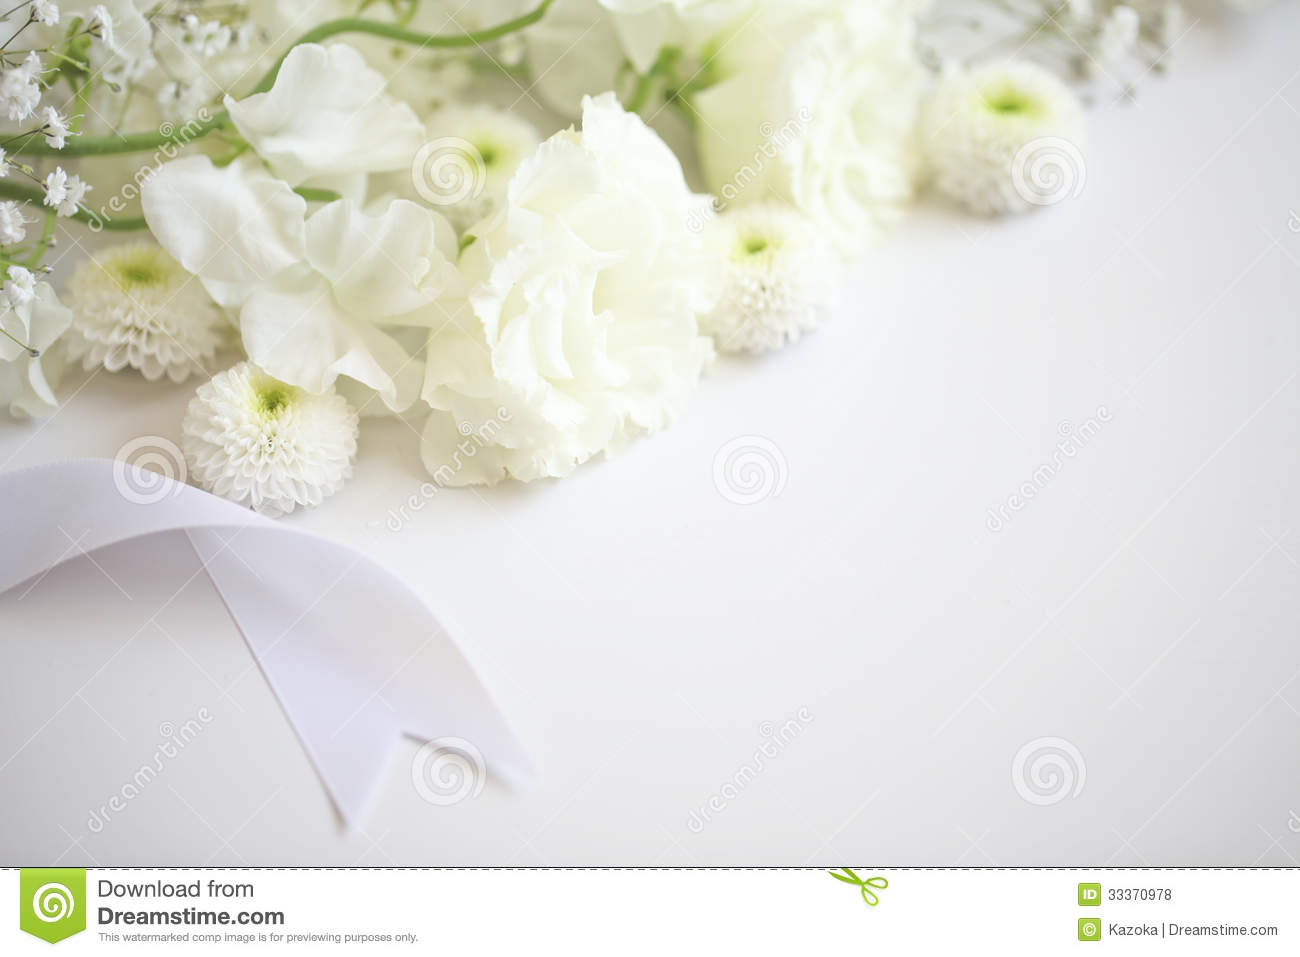 Funeral Flowers Royalty Free Stock Photos   Image  33370978